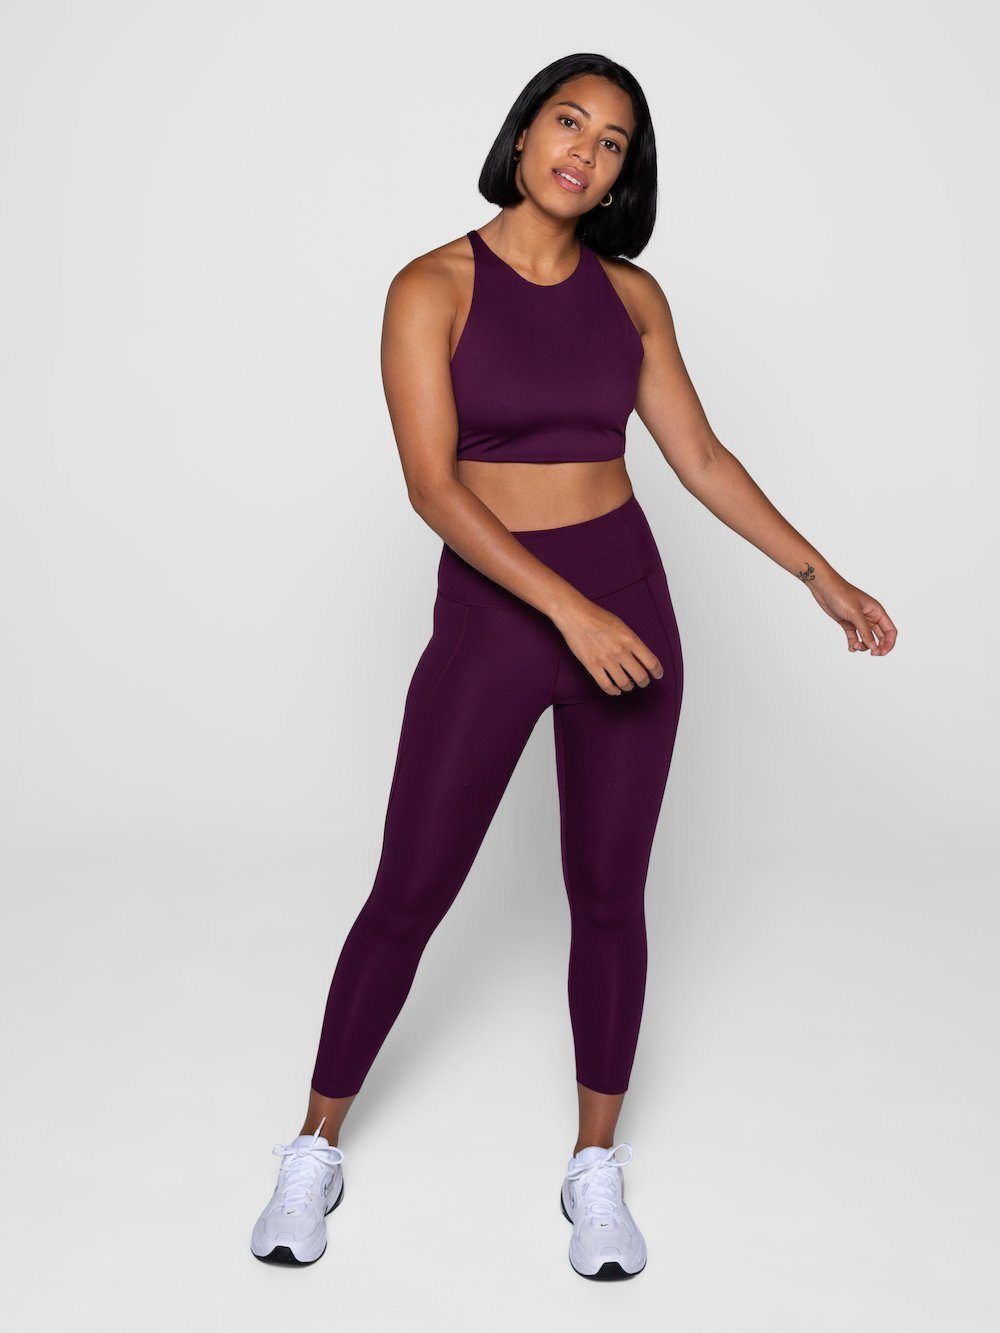 Girlfriend Collective W's Compressive Legging - 7/8 - Made From Recycled Plastic Bottles Plum Pants